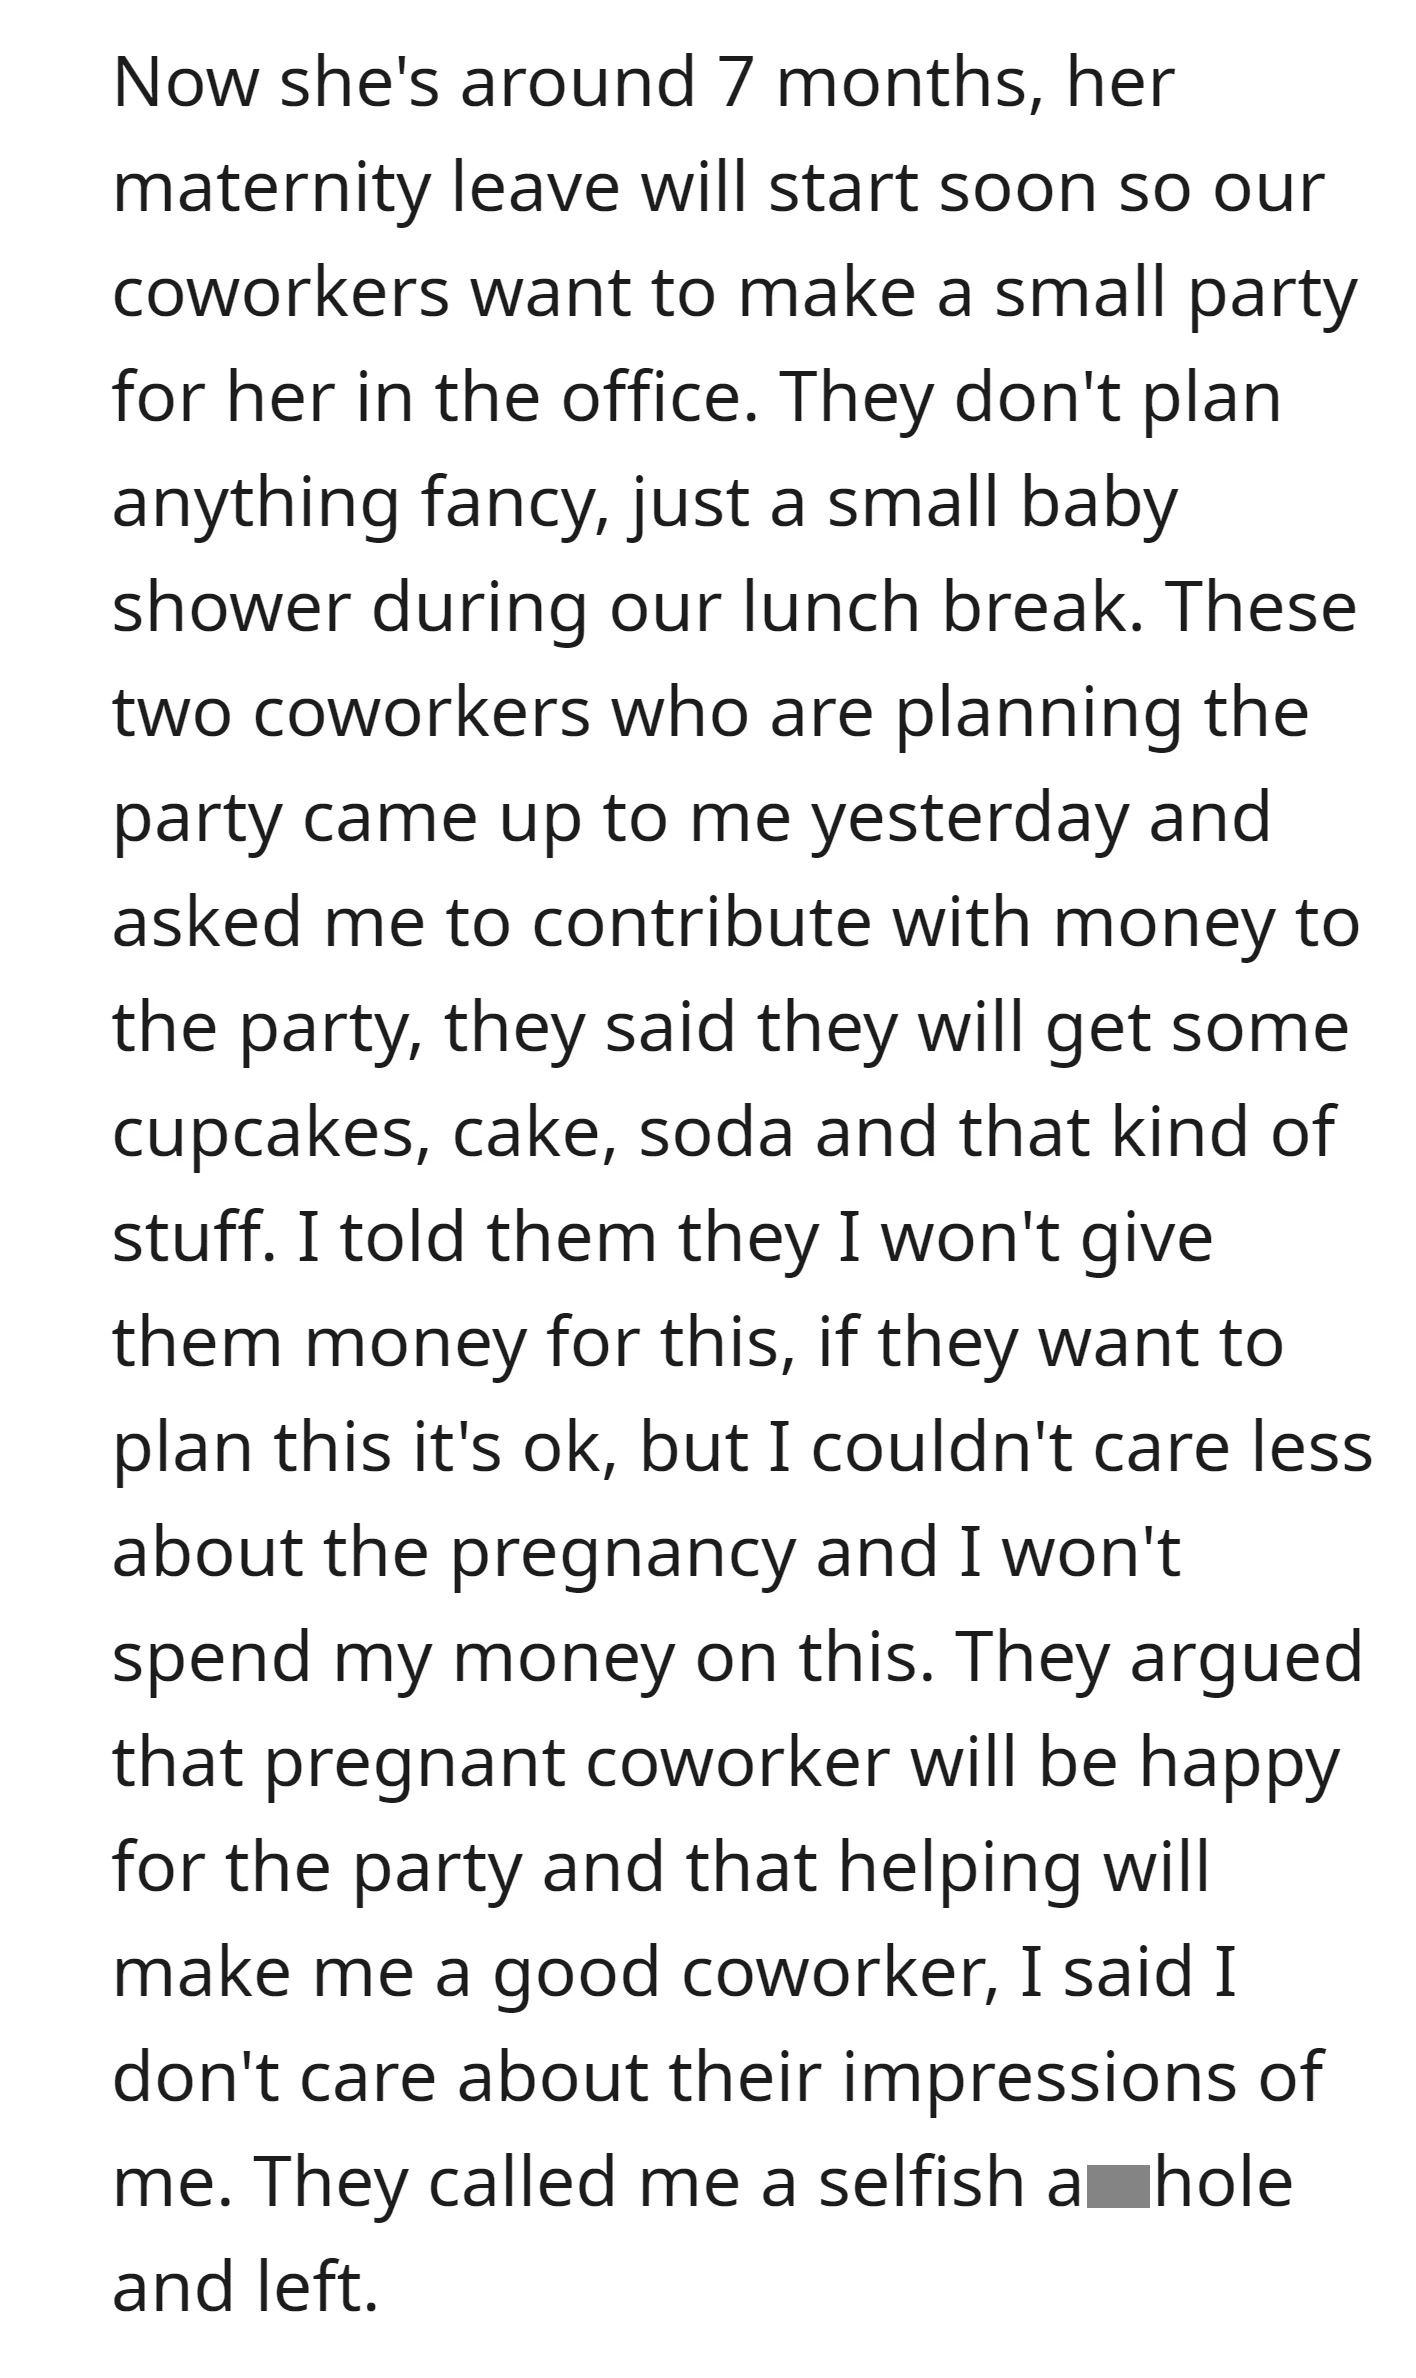 Coworkers planning a small baby shower for a 7-month pregnant colleague